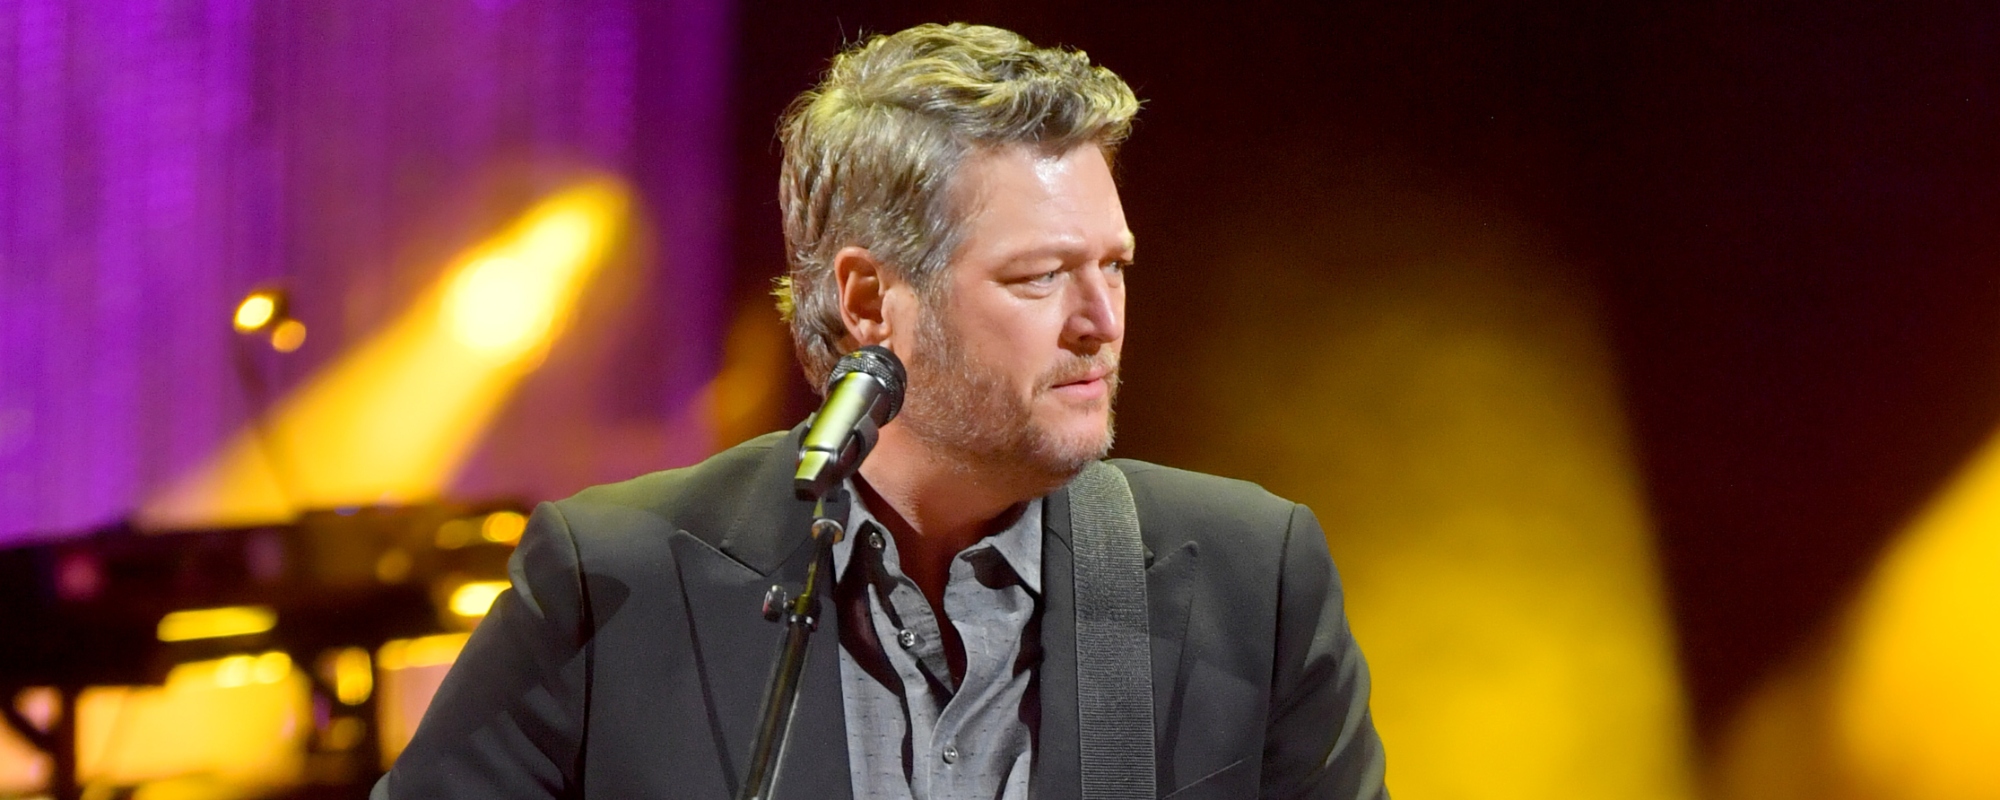 Blake Shelton Takes to Social Media to Clear Up Confusion Surrounding Upcoming Oklahoma Show